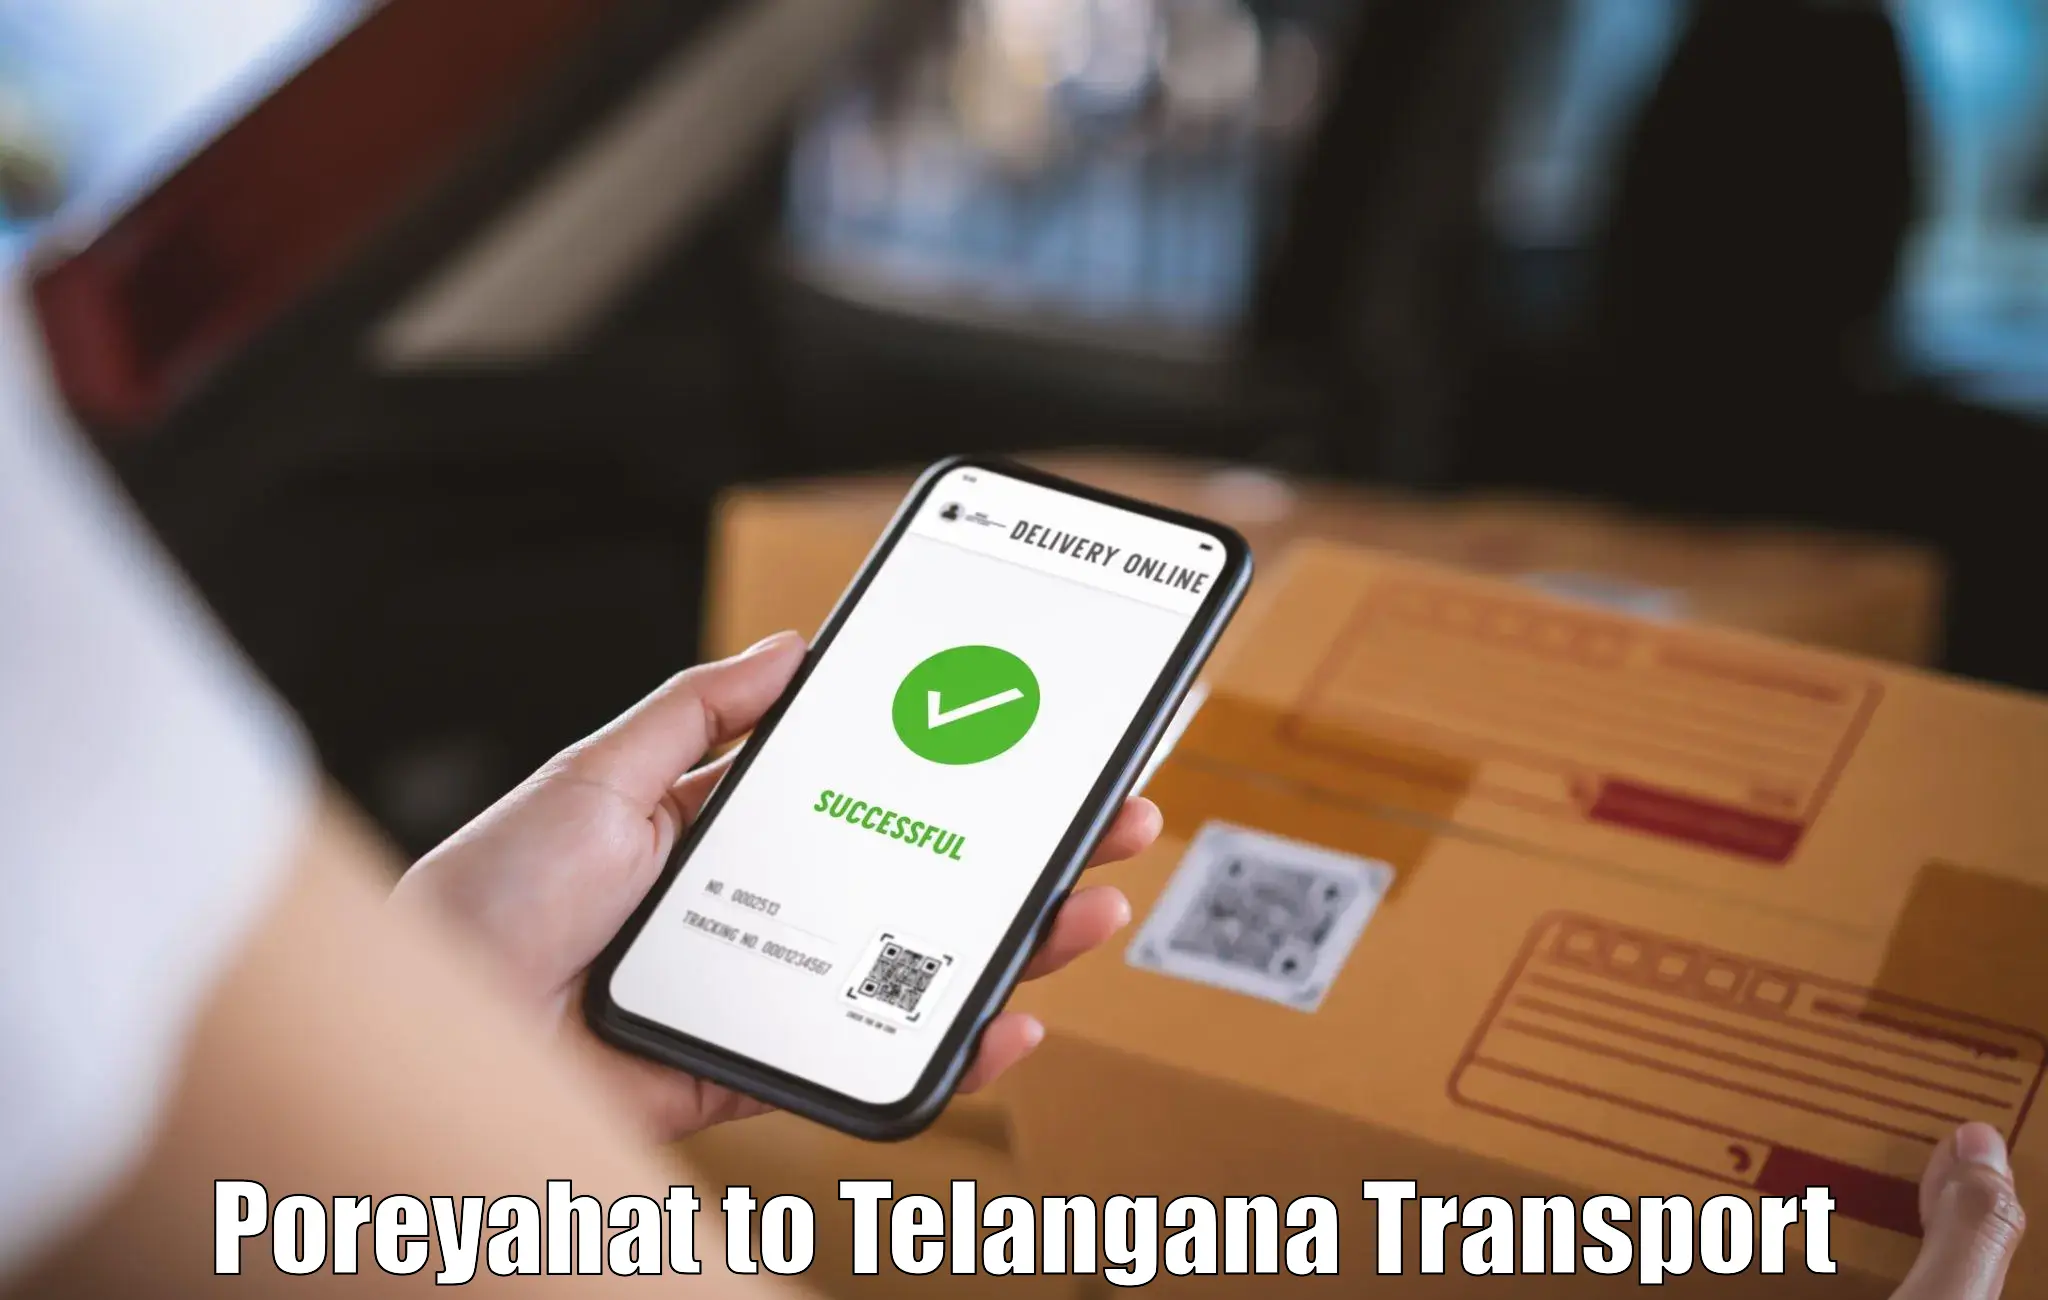 Transport shared services Poreyahat to Gollapalli